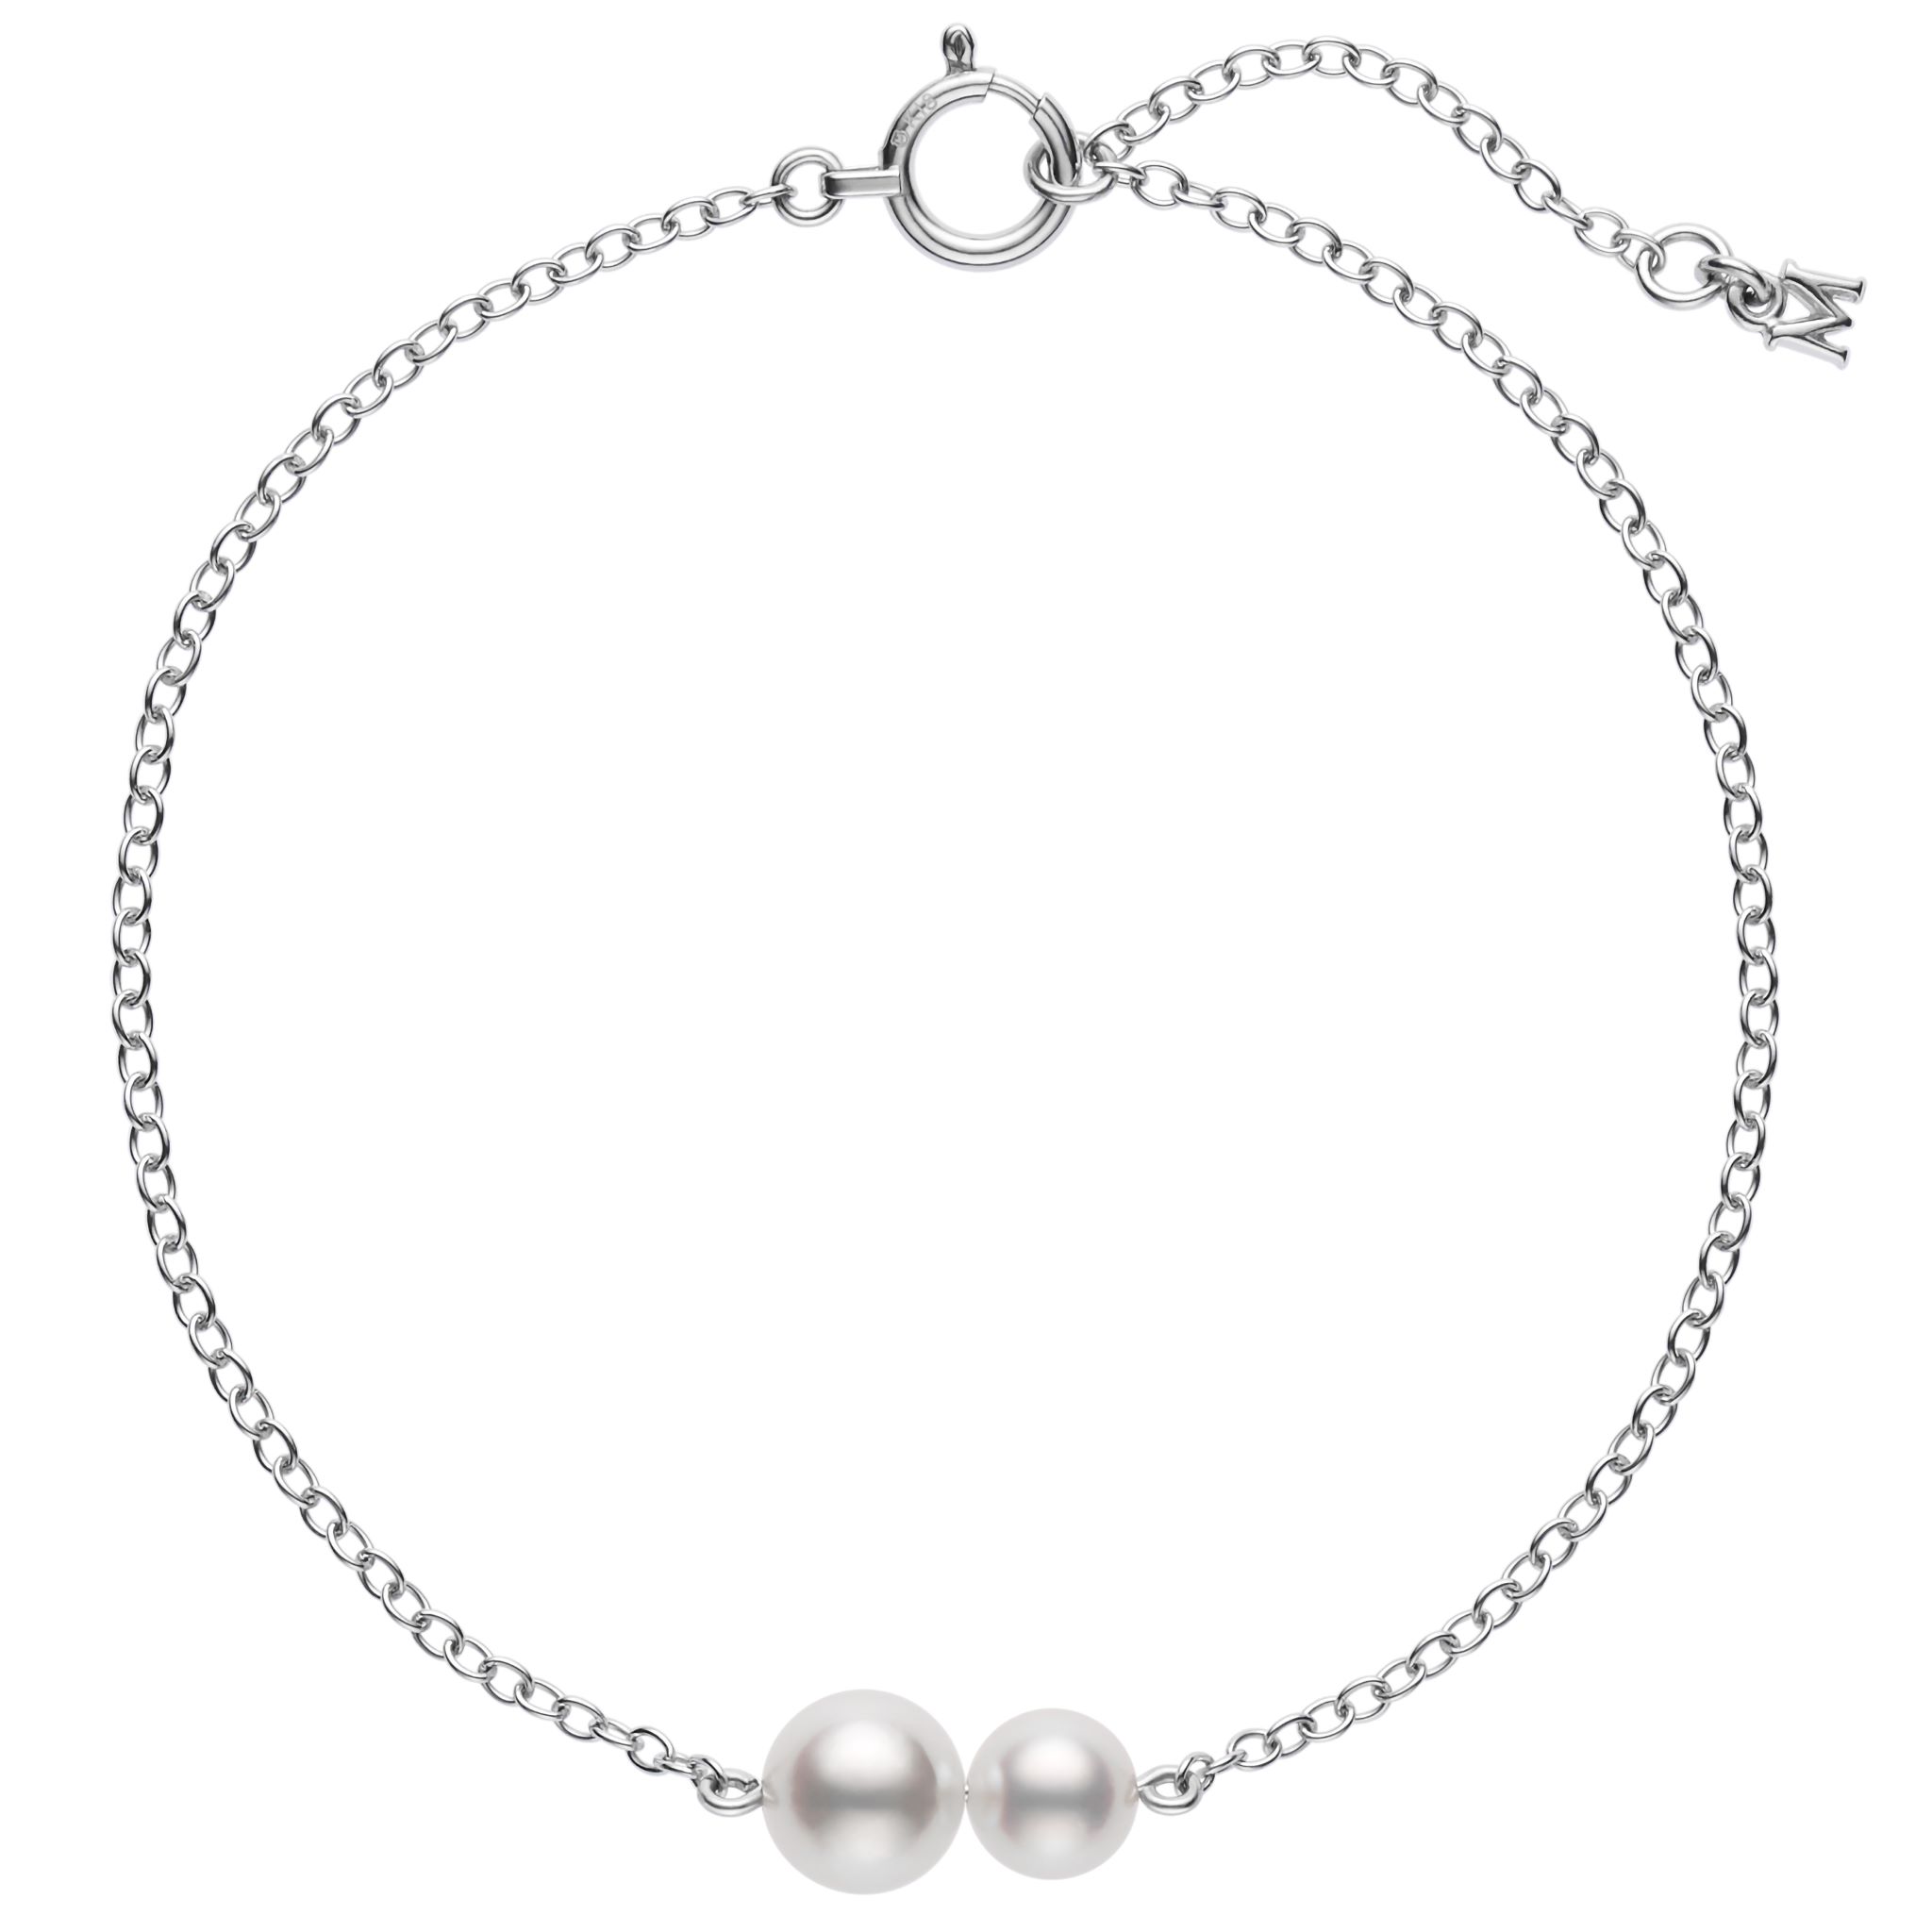 This pearl bracelet by Mikimoto is crafted from 18k white gold and features a 5mm white pearl and a 6mm white pearl. This bracelet is adjustable 6.25" or 7" long.